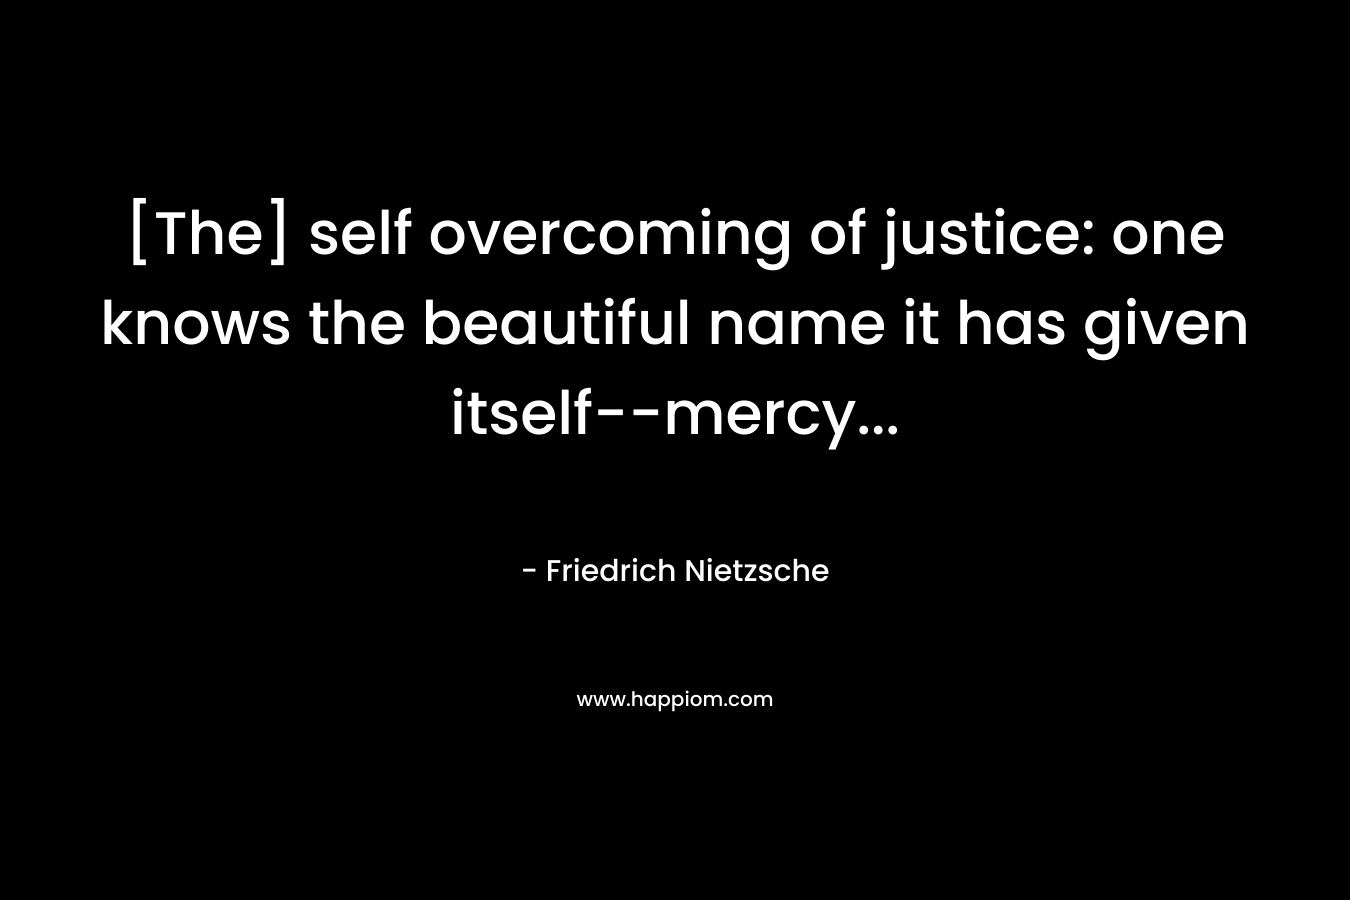 [The] self overcoming of justice: one knows the beautiful name it has given itself--mercy...